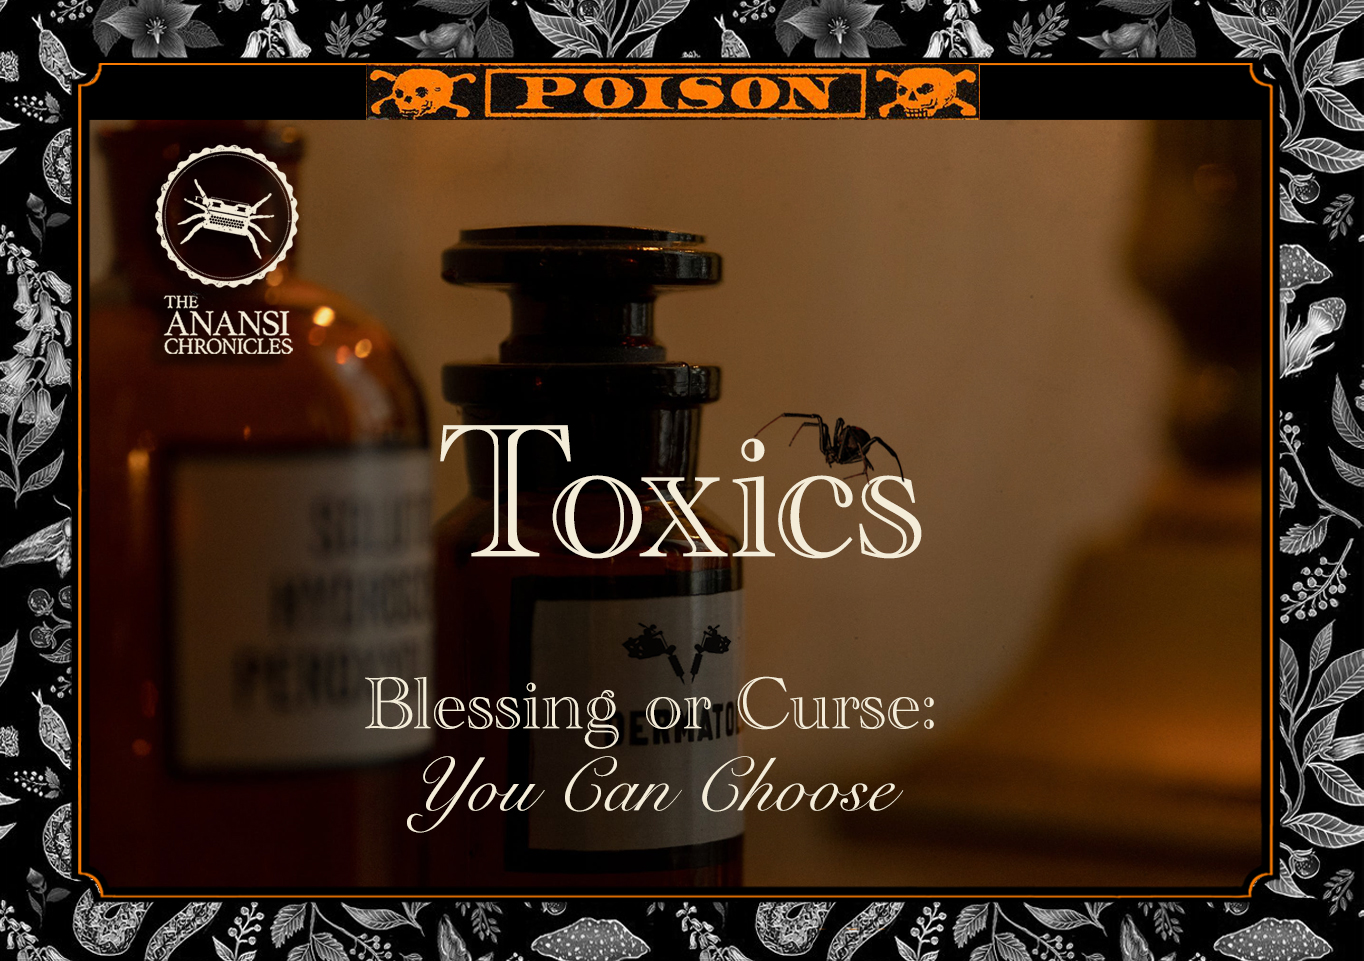 Poisons – about the curses and blessings of toxins